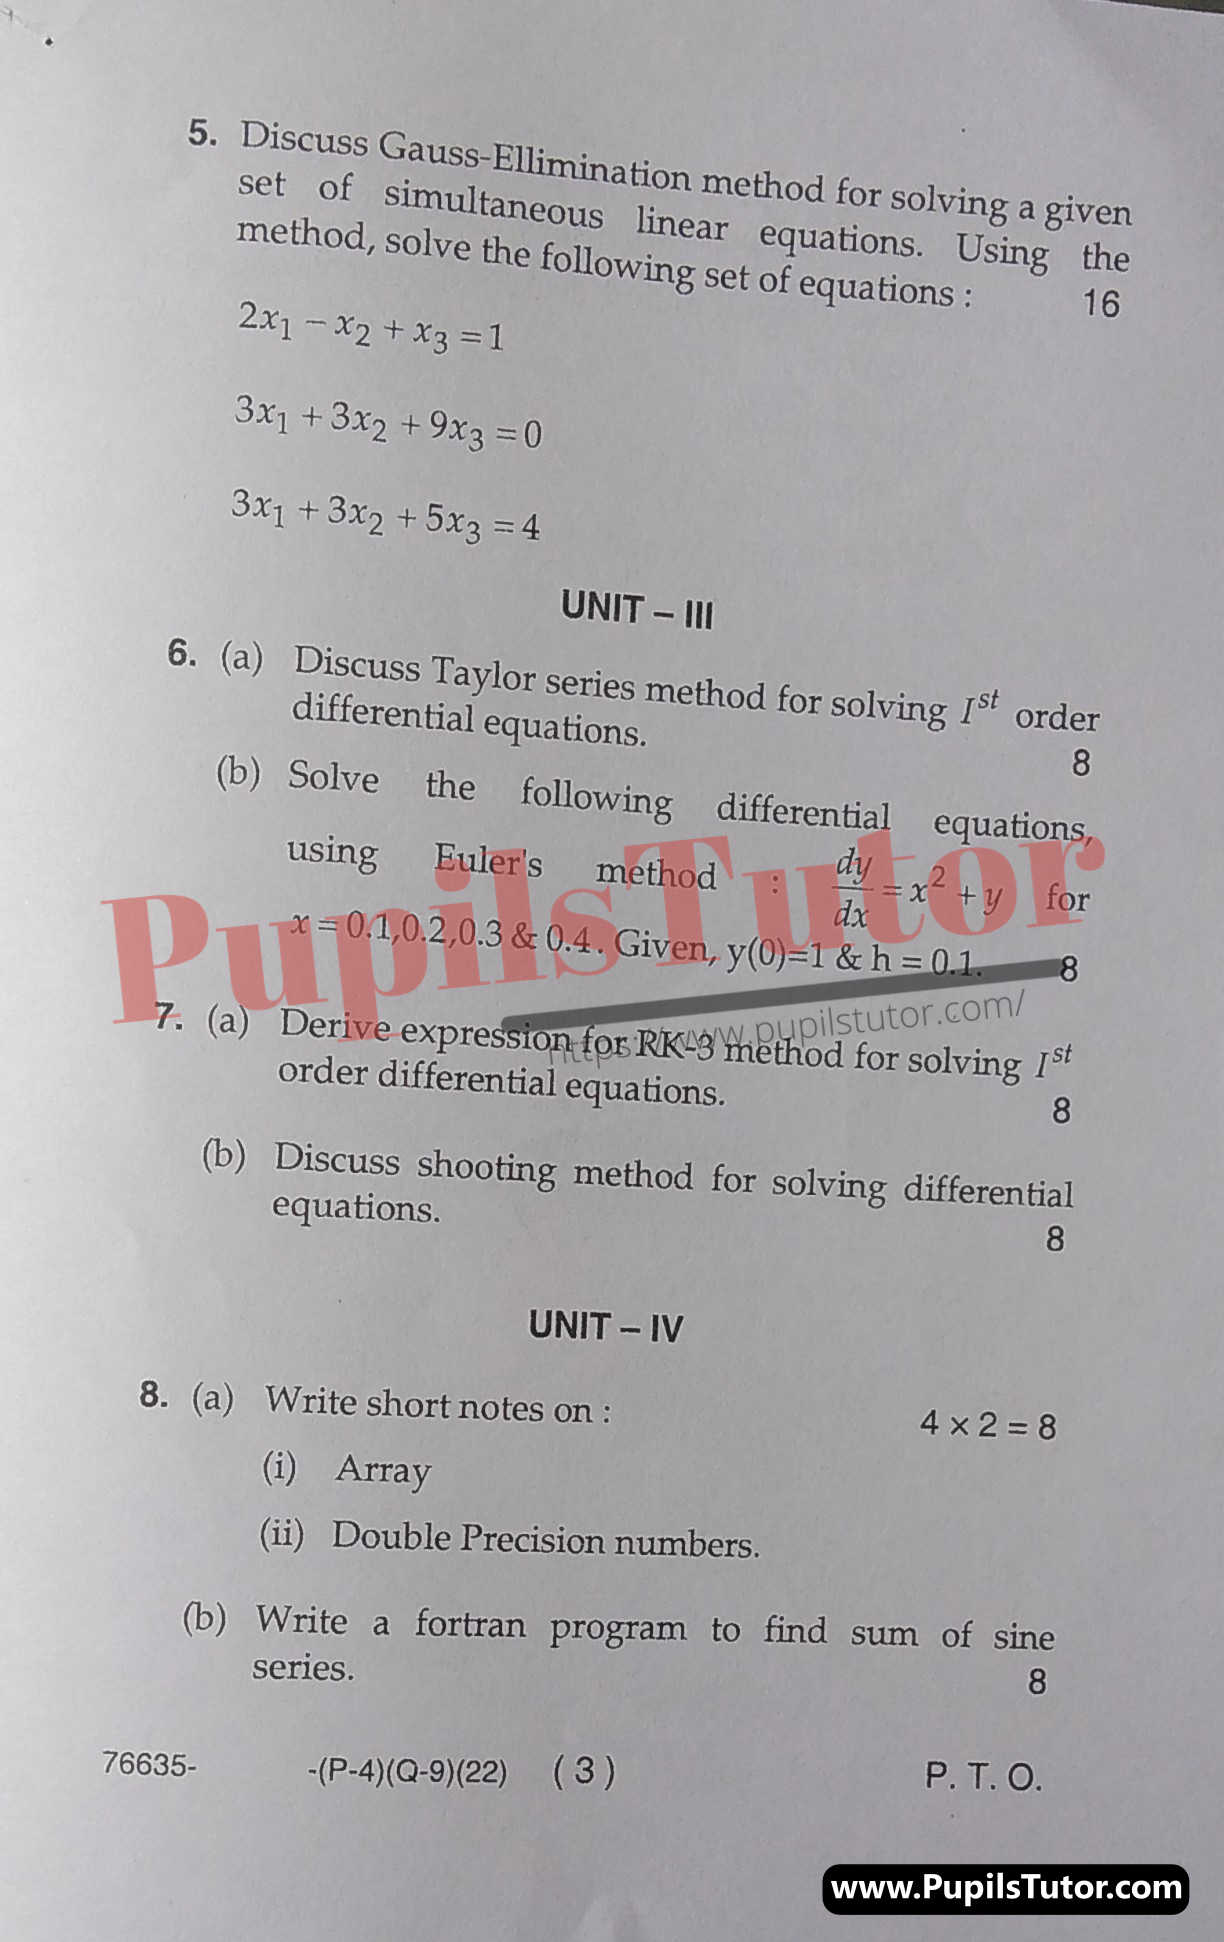 Free Download PDF Of M.D. University M.Sc. [Physics] Third Semester Latest Question Paper For Computation Physics Subject (Page 3) - https://www.pupilstutor.com